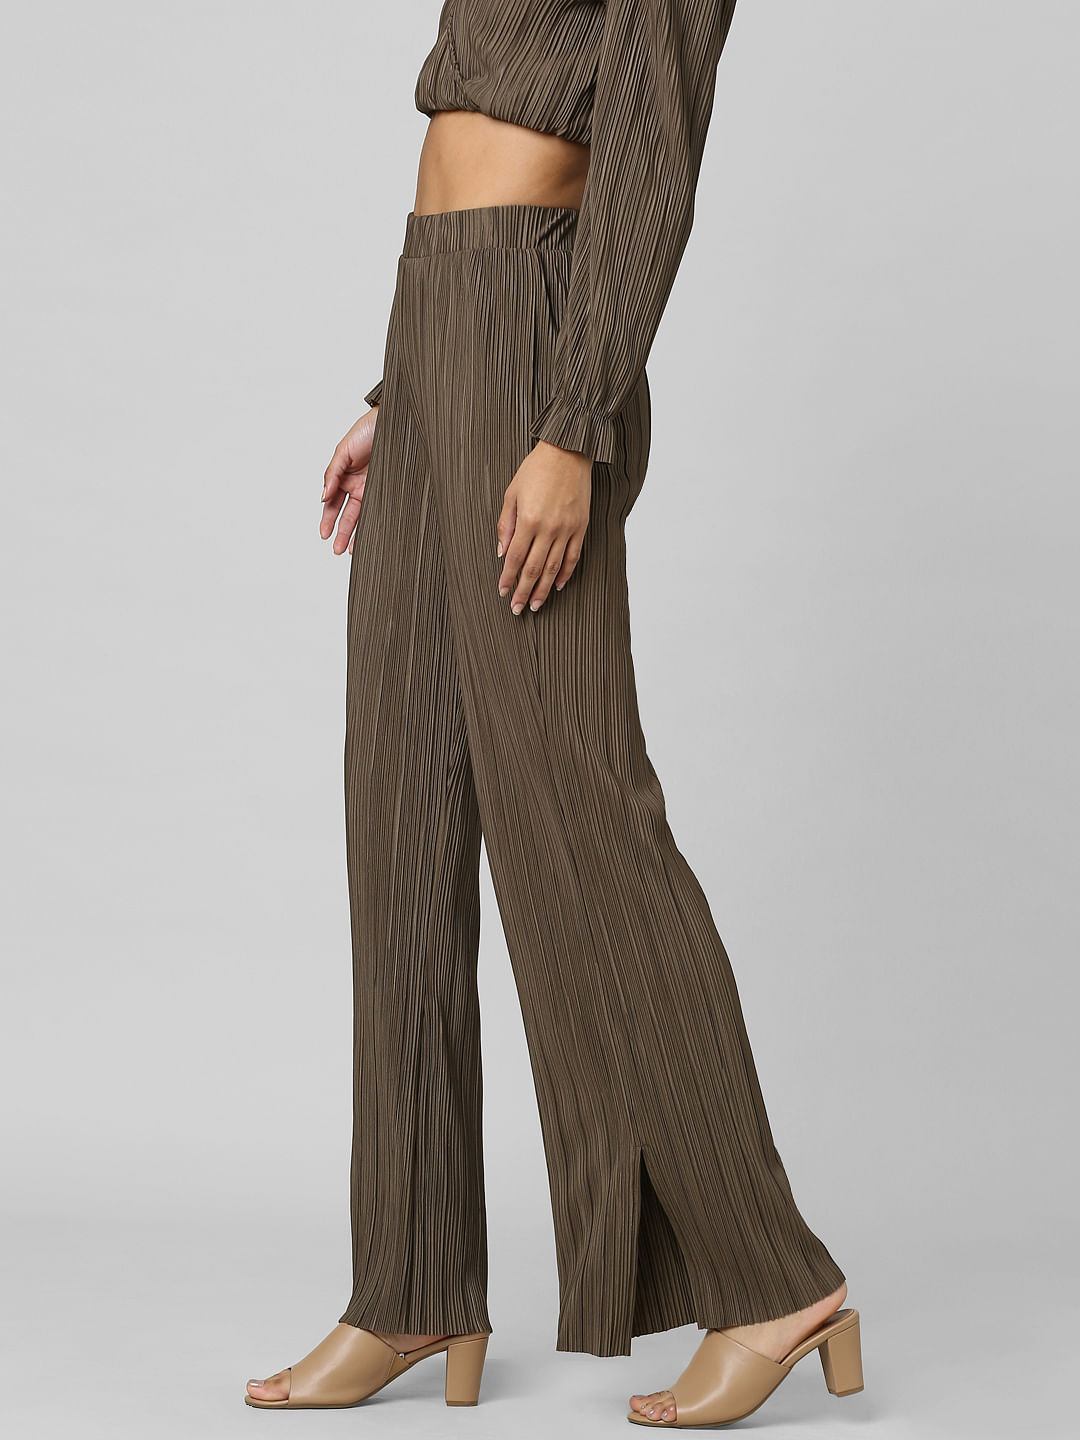 Buy Brown Trousers & Pants for Women by Zink London Online | Ajio.com